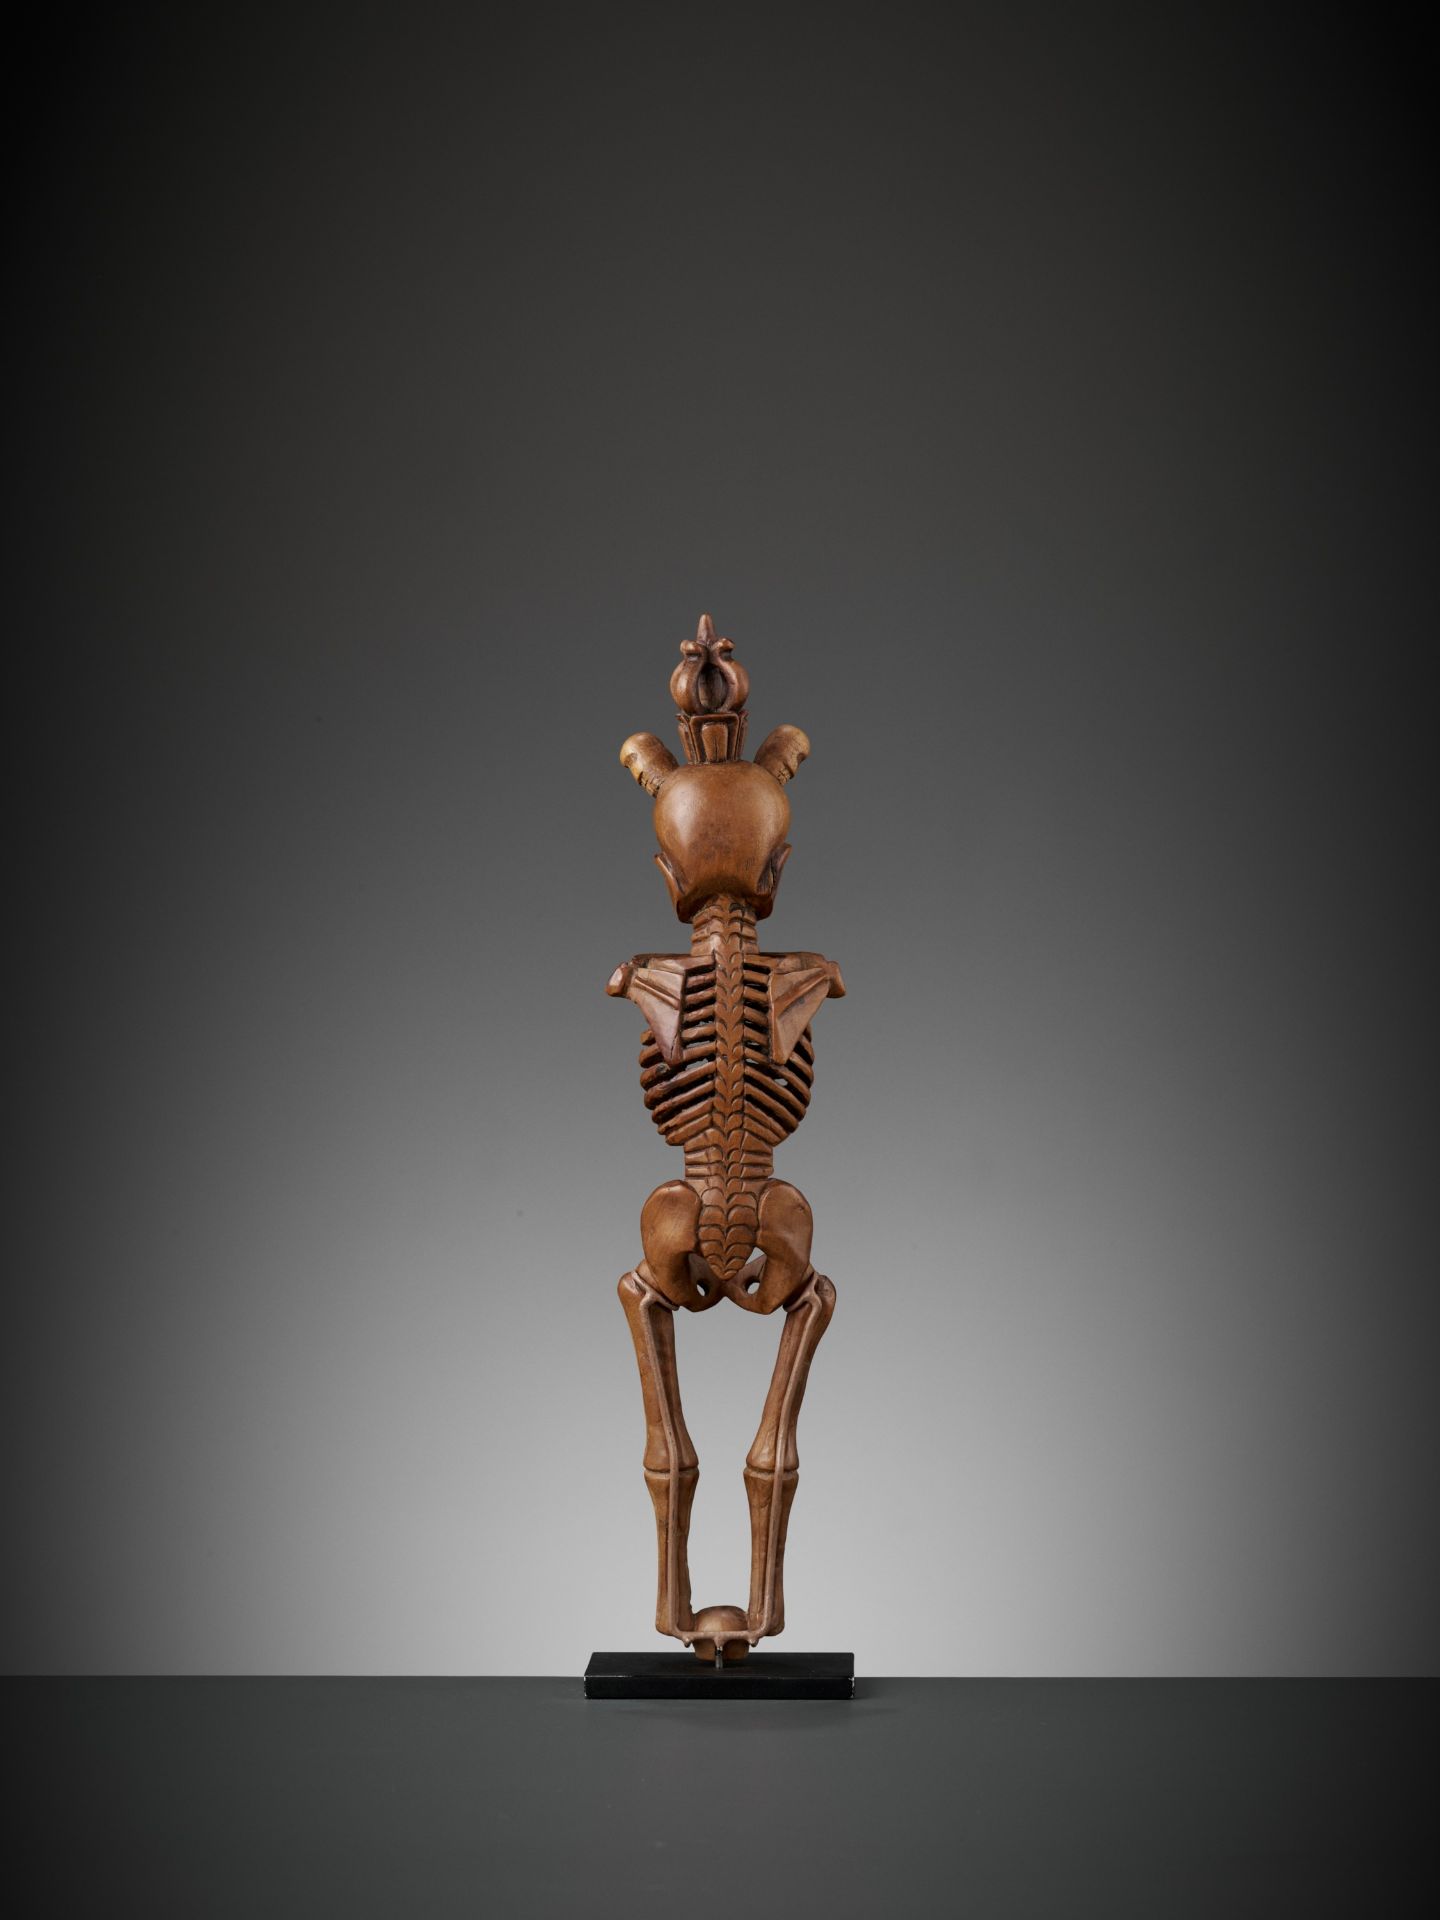 AN IMPORTANT AND RARE BAMBOO FIGURE OF A CITIPATI, 17TH-18TH CENTURY - Image 11 of 11